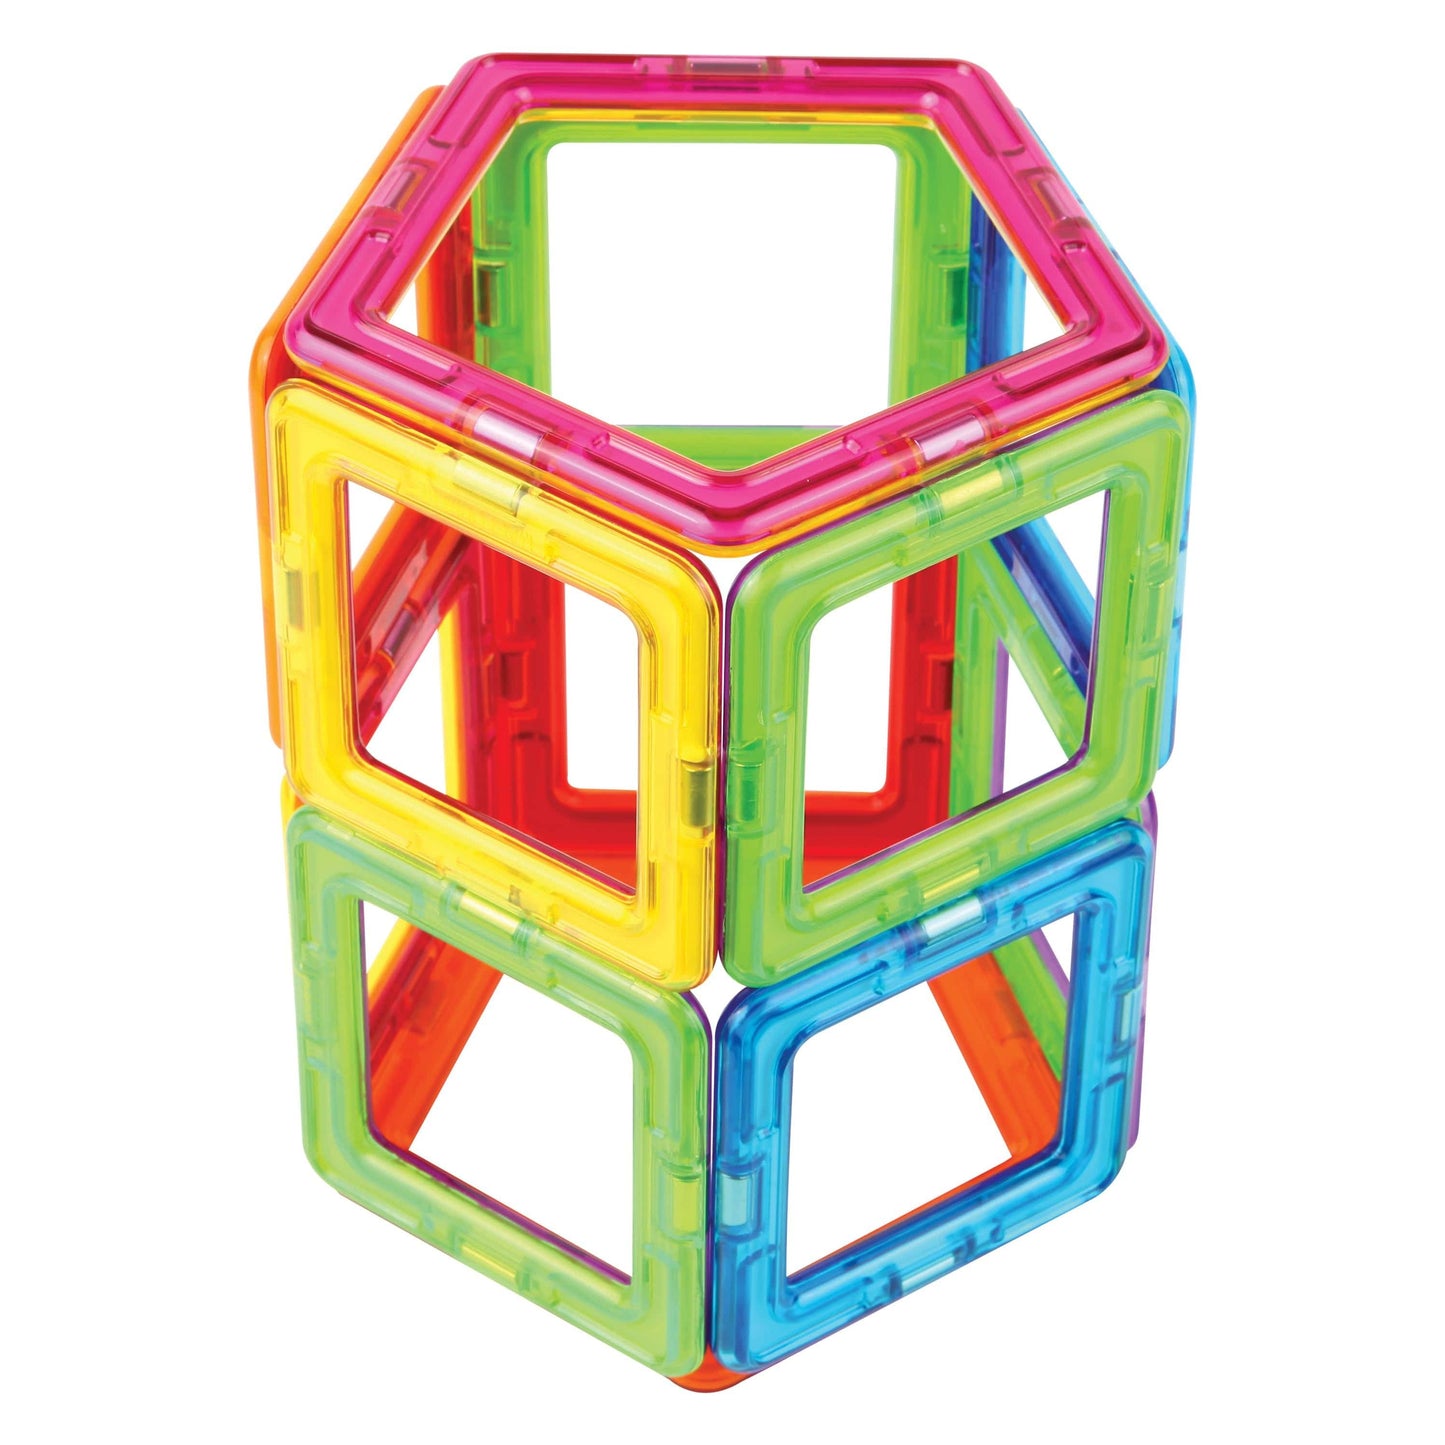 pentagonal prism shape made from Magformers Construction Toys Basic 42 Piece Set + Storage Box